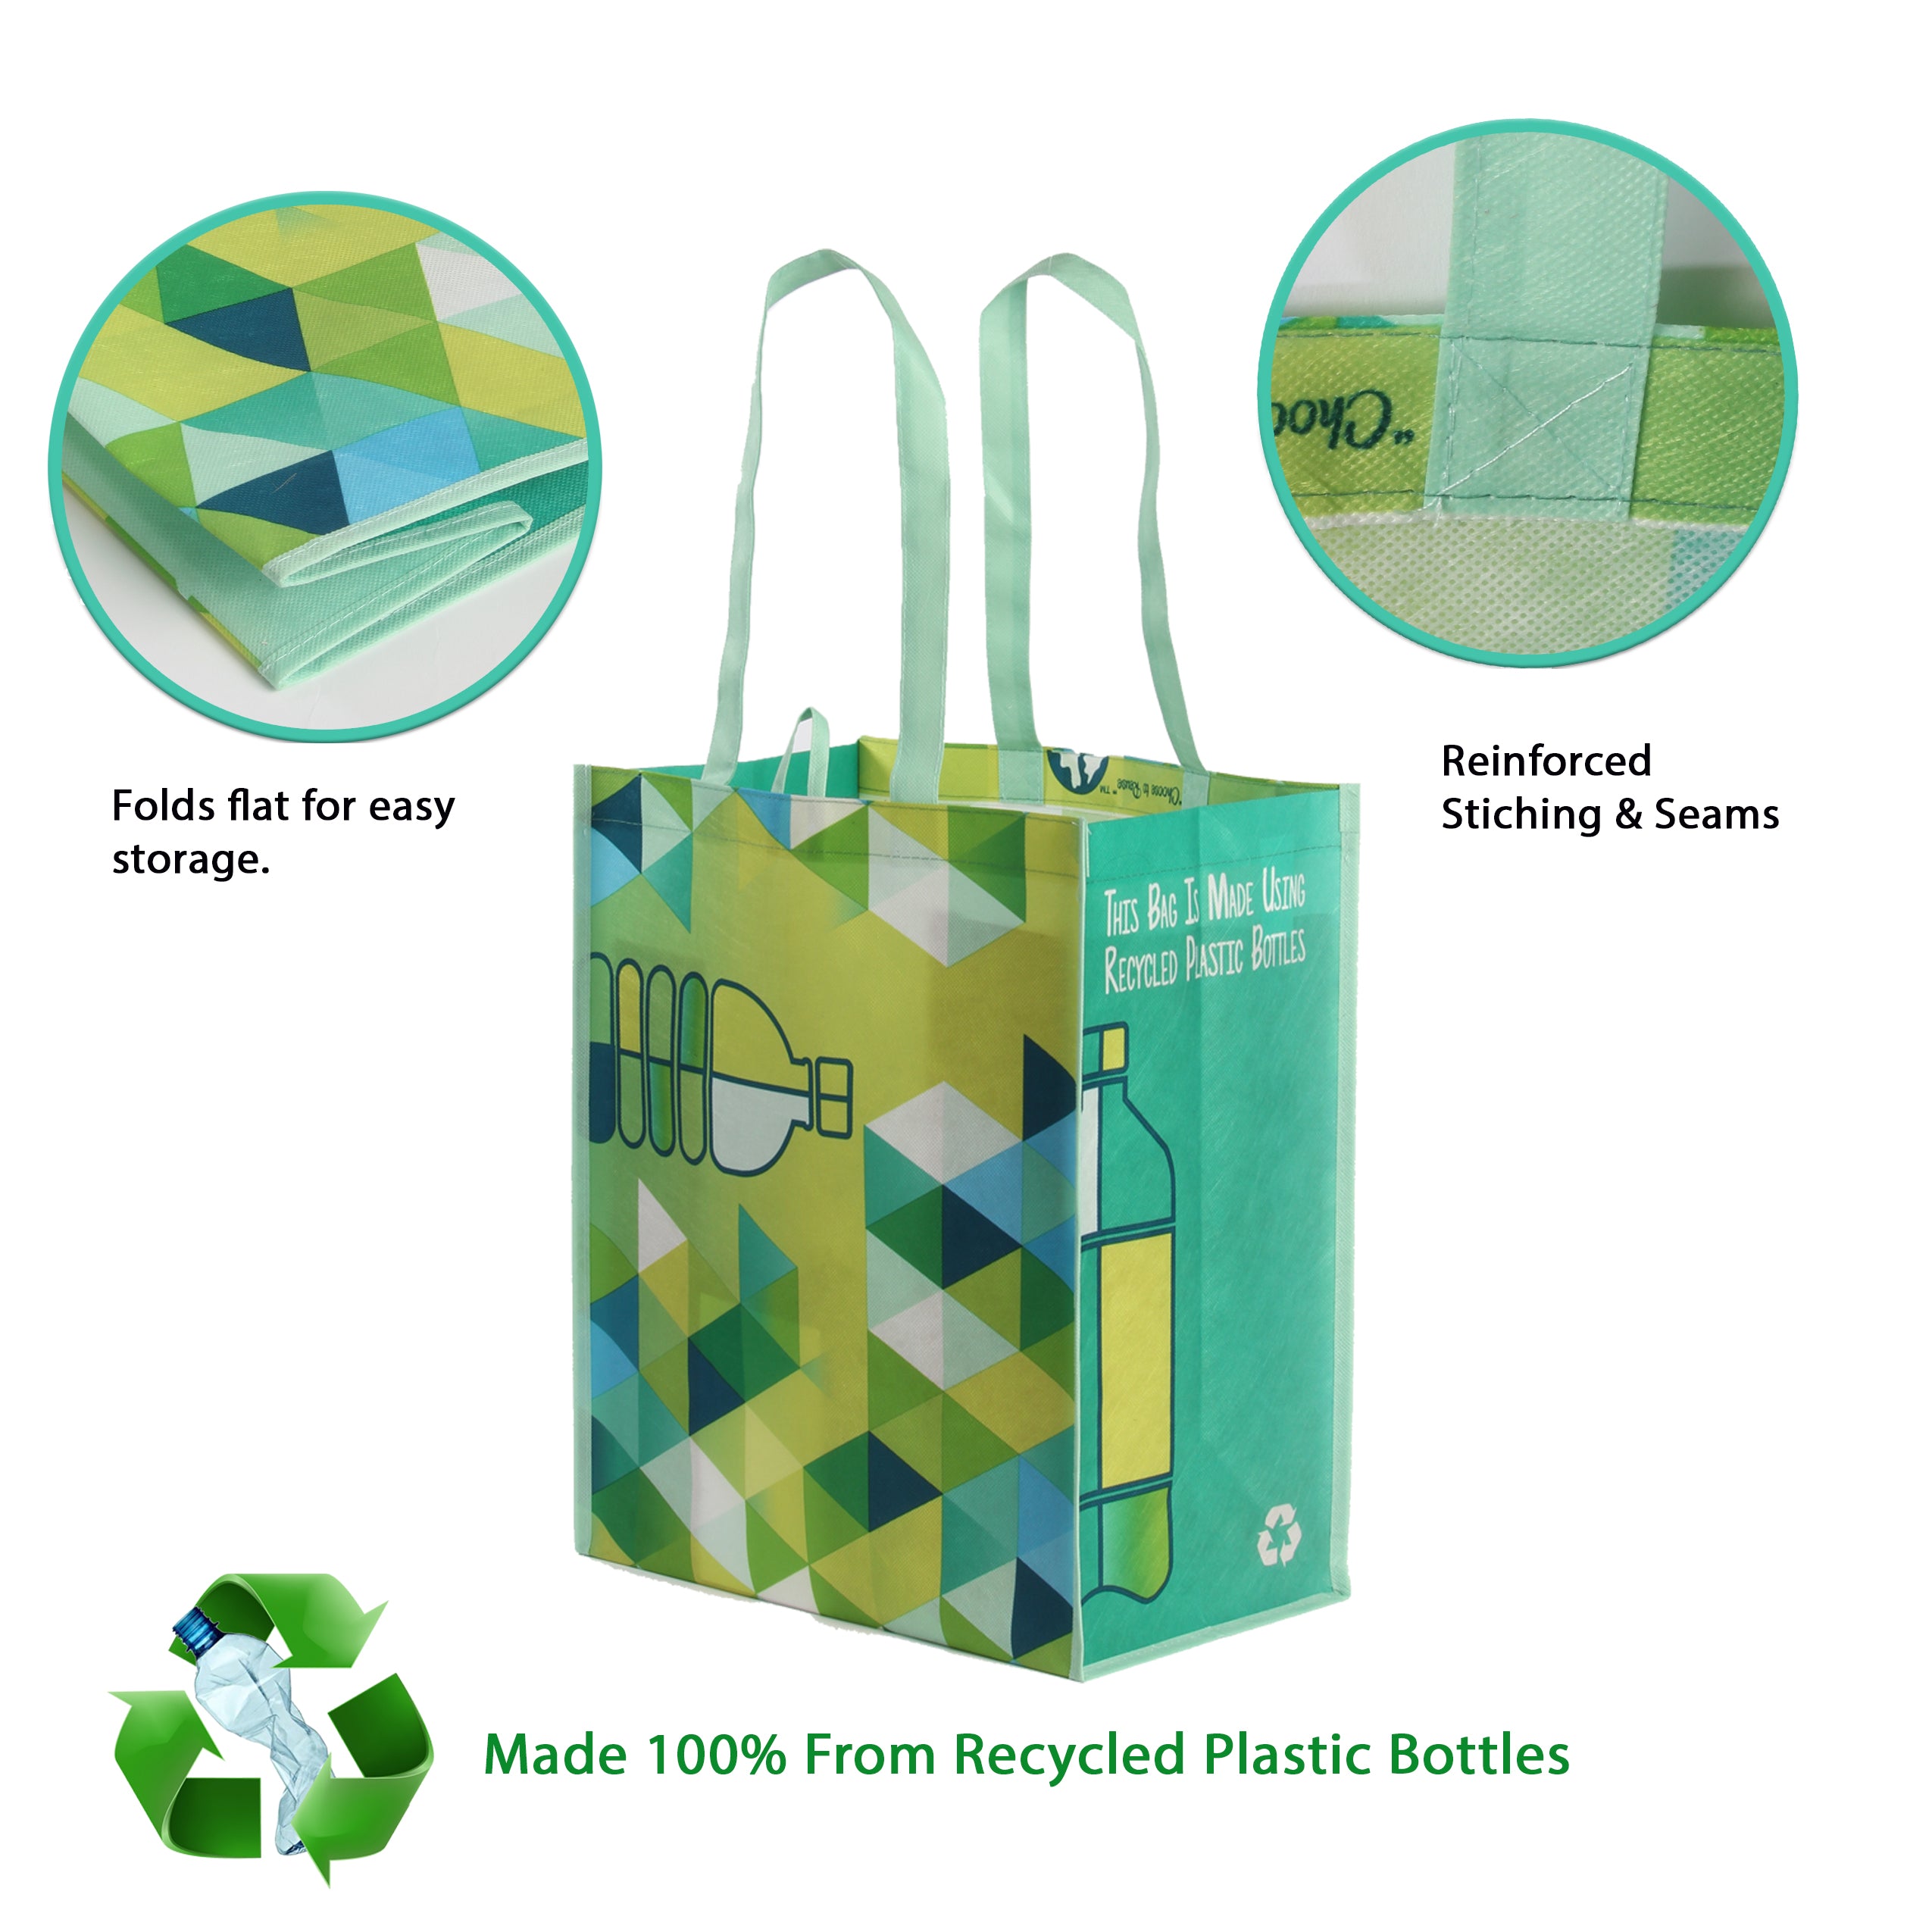 15 Cool Products Youd Never Guess are Made from Recycled Plastic